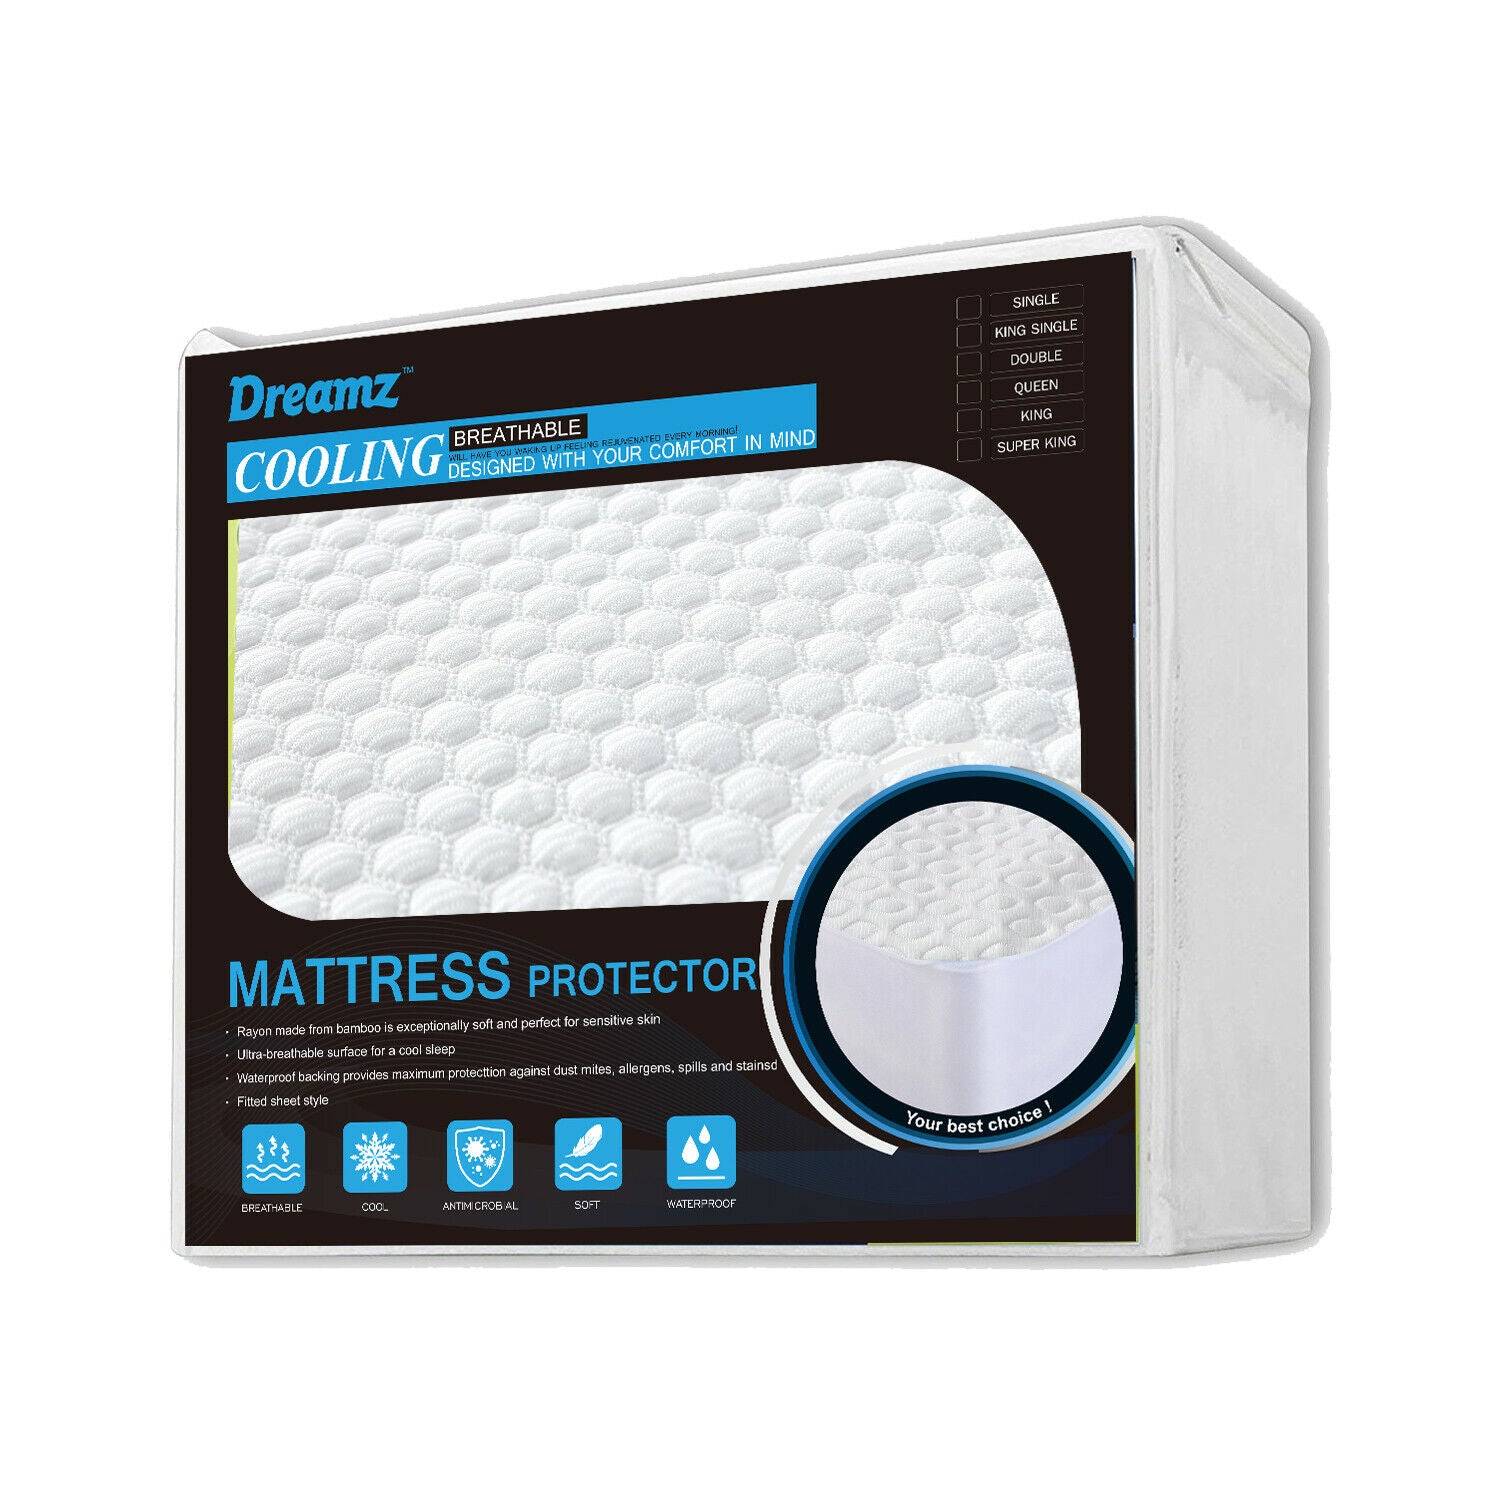 Mattress Protector Topper Polyester Cool Fitted Cover Waterproof Double - image2